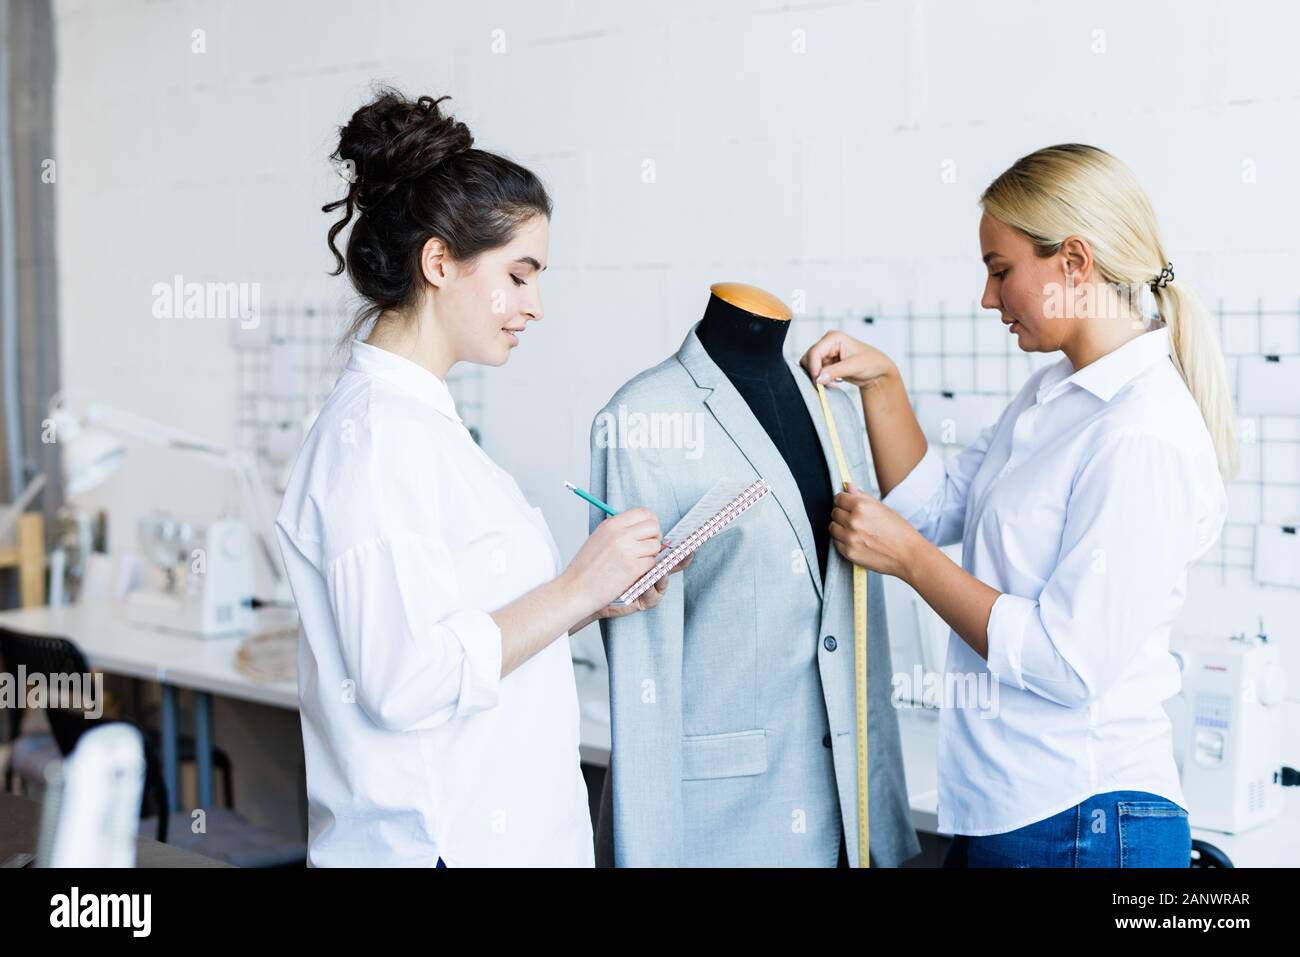 Girls sewing jacket together Stock Photo